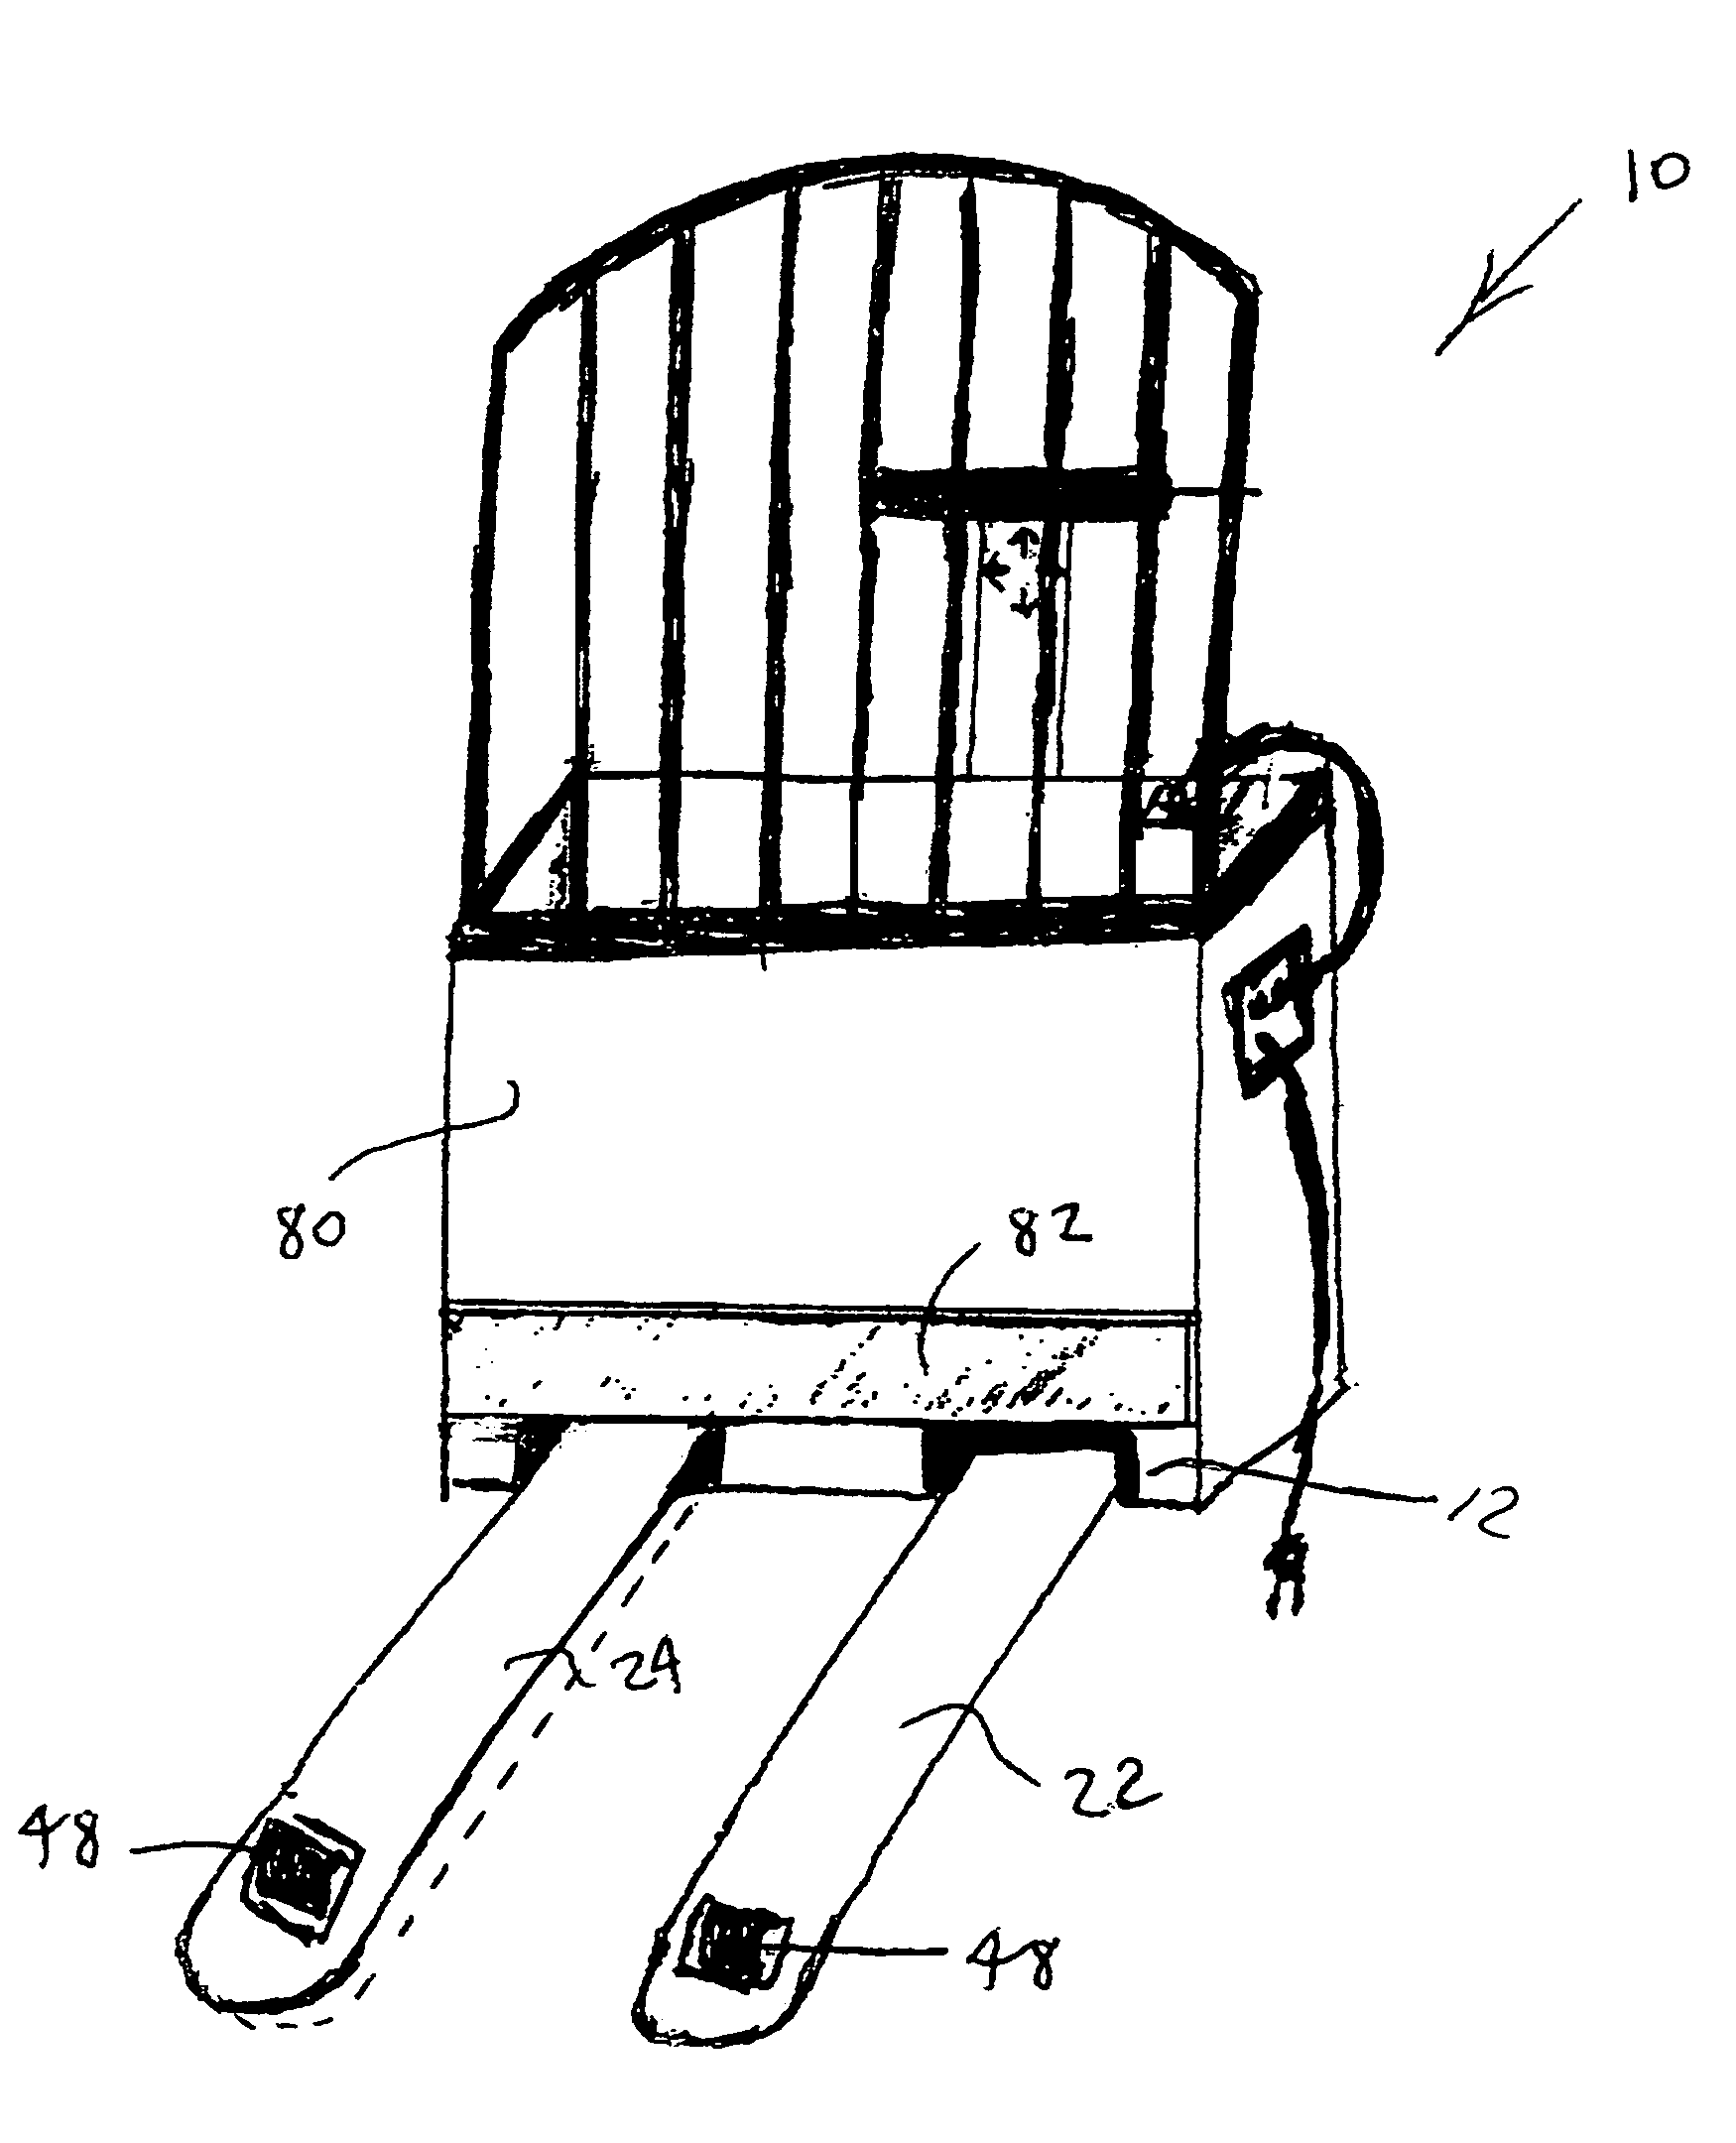 Pallet jack with independently elevatable fork arms